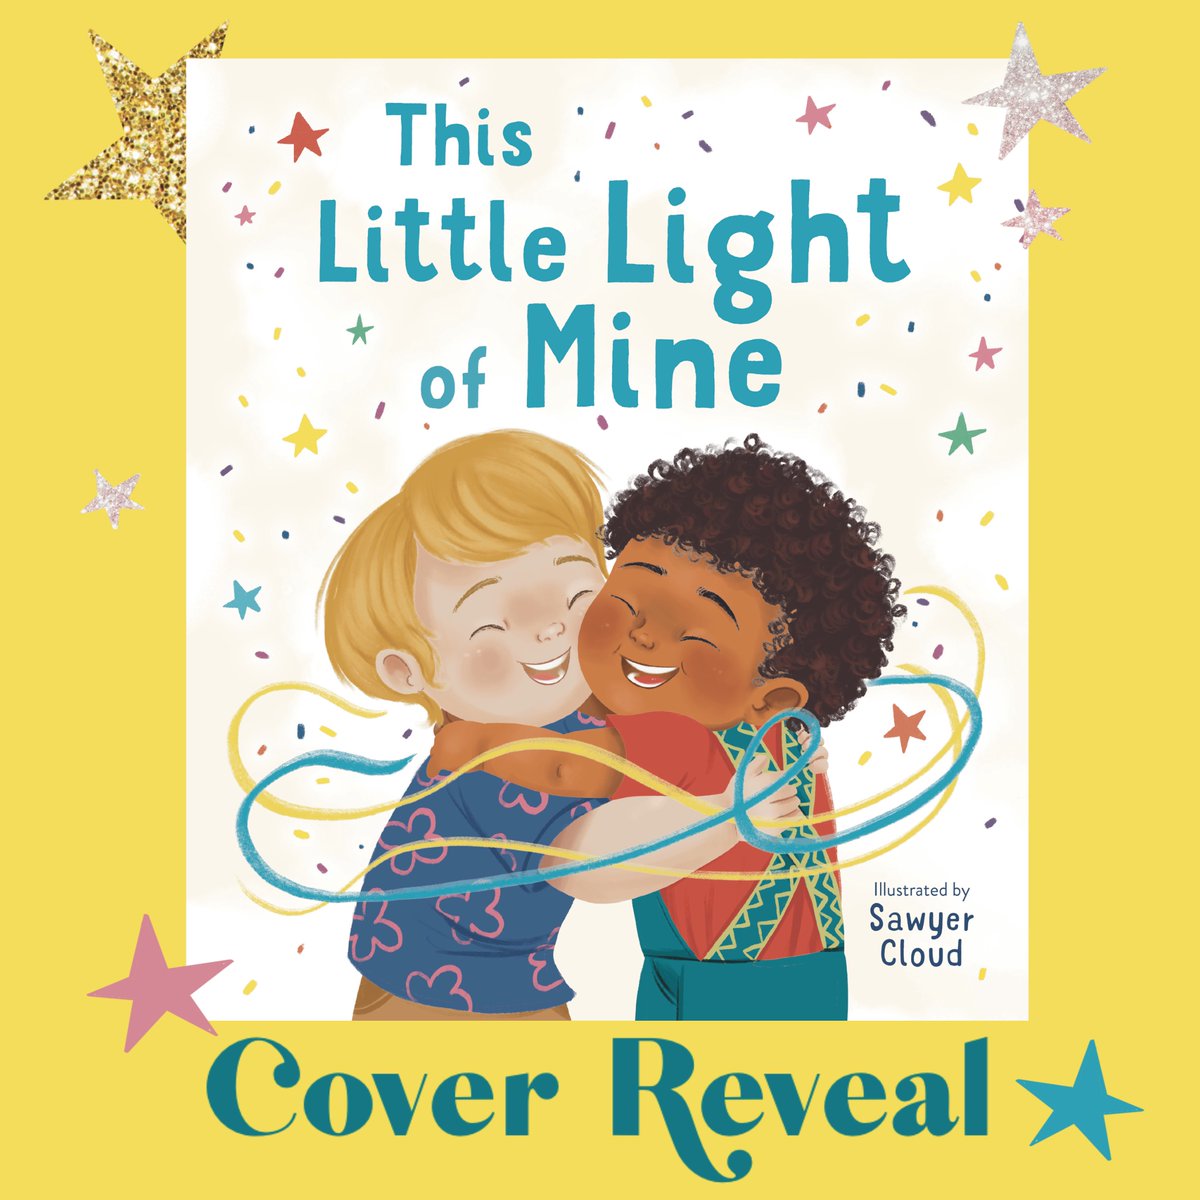 ✨COVER REVEAL 📚 I'm happy to share with you the cover of my new book 'This Little Light Of Mine' which is inspired by the popular gospel song. ✨US and Canada editions are already available for pre-order: abramsbooks.com/product/this-l… ✨The book will be published on August 6, 2024.